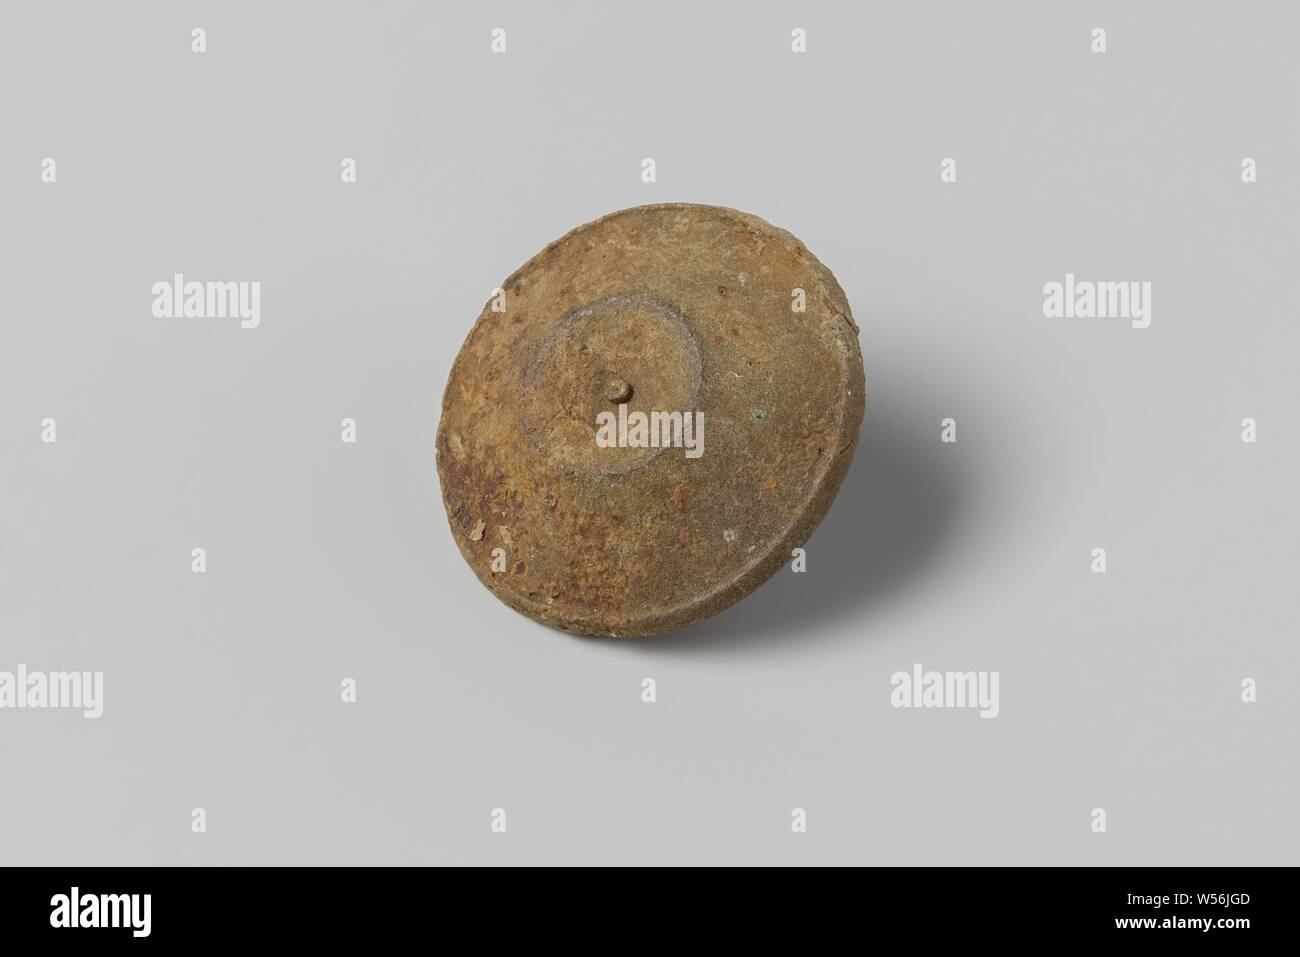 Button from the wreck of the East Indies ship Hollandia, Knoop. (1) concentric molding (1.7d, 0.4t), Annet, Dutch East India Company, Hollandia (ship), anonymous, Netherlands, 1700 - in or before 13-Aug-1743, bone (material), h 0.8 cm × d 1.7 cm Stock Photo